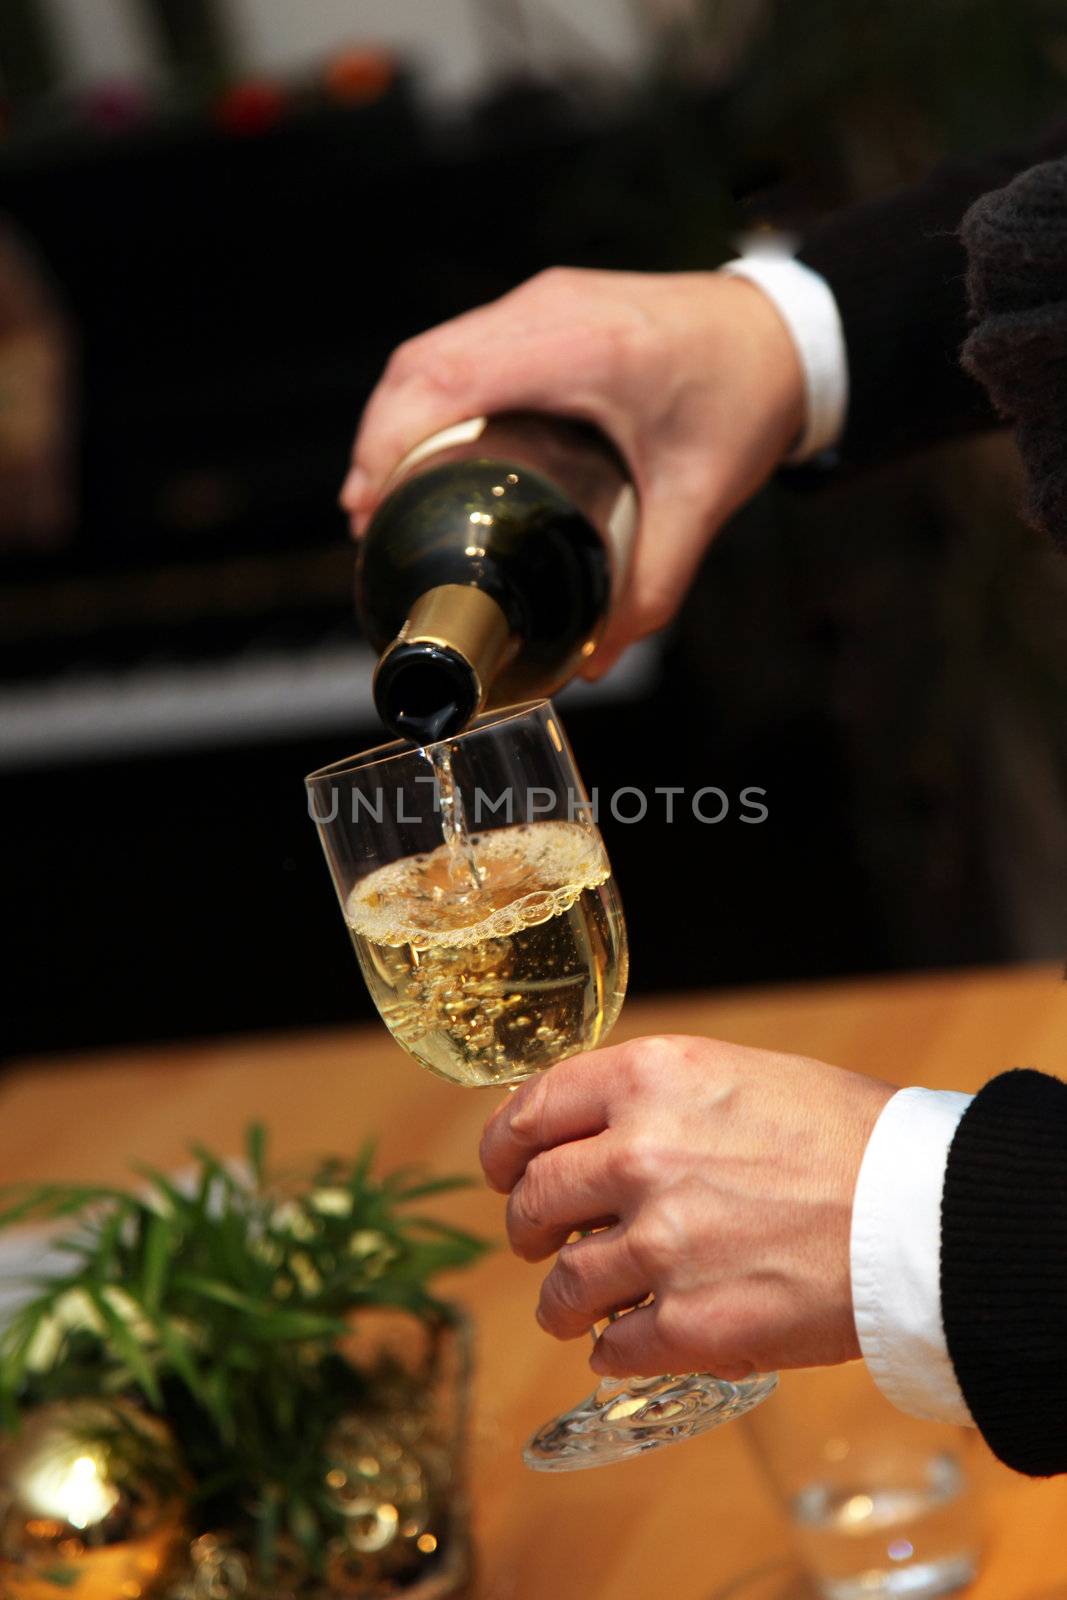 Waiter pours a glass of wine by Farina6000